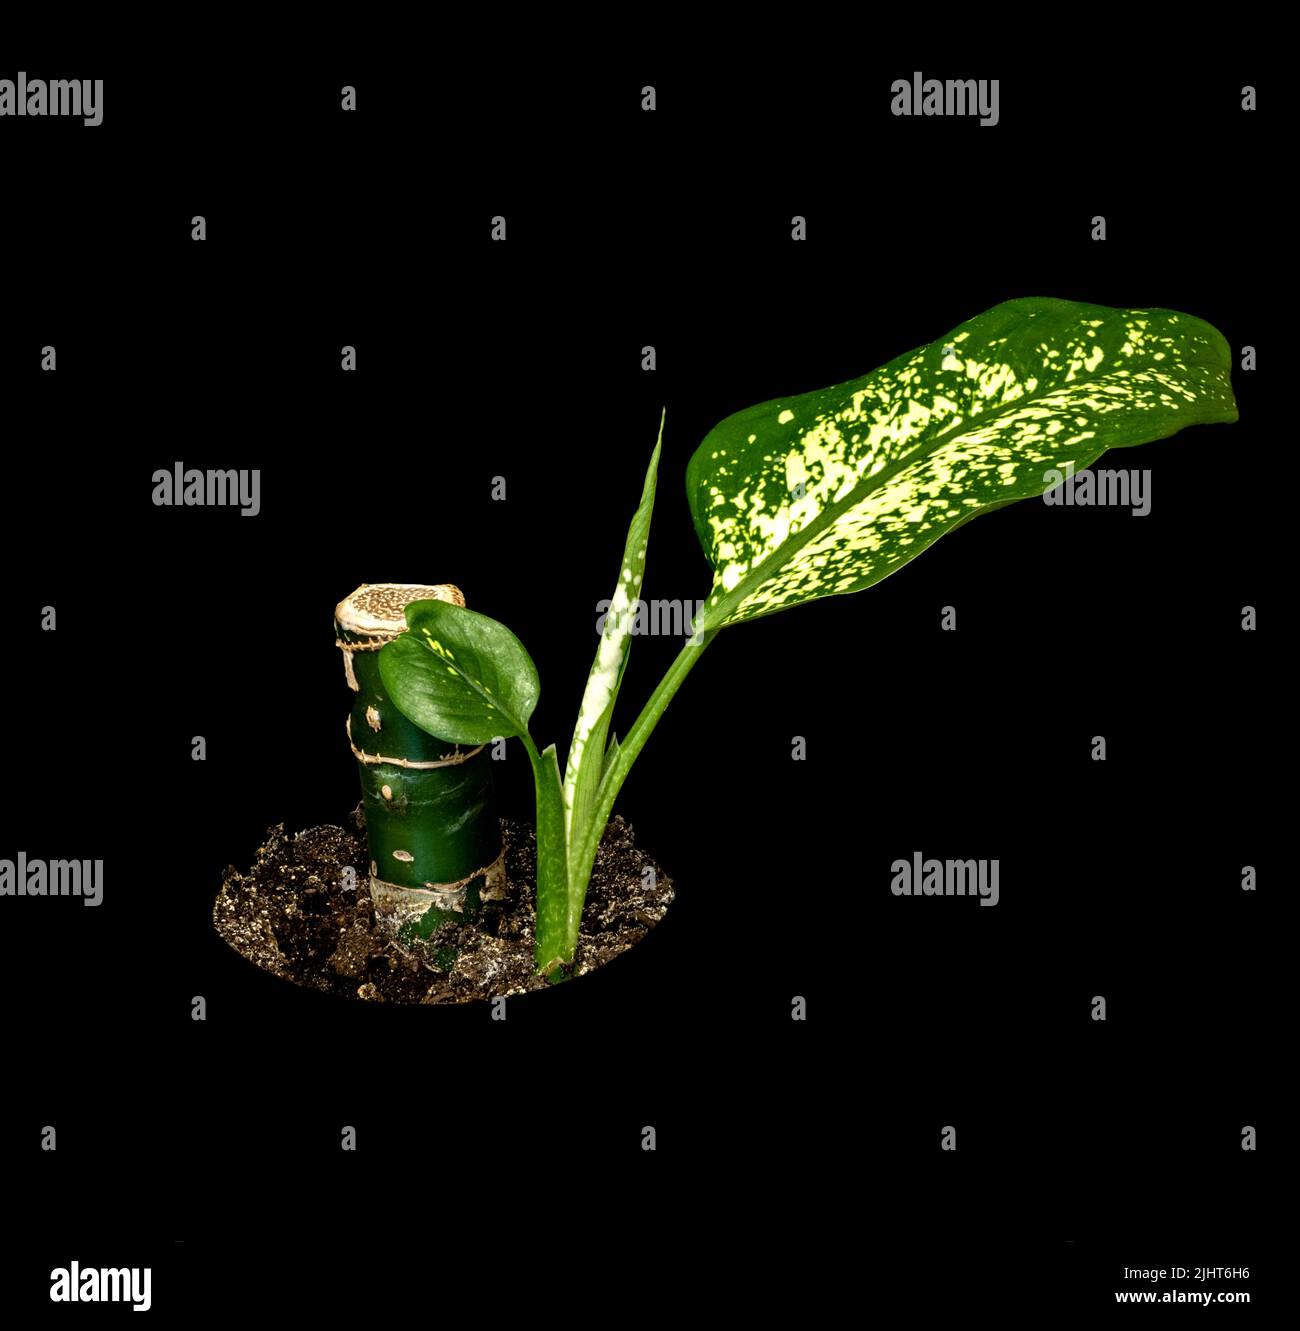 Image of a young shoot of dieffenbachia on a black background Stock Photo